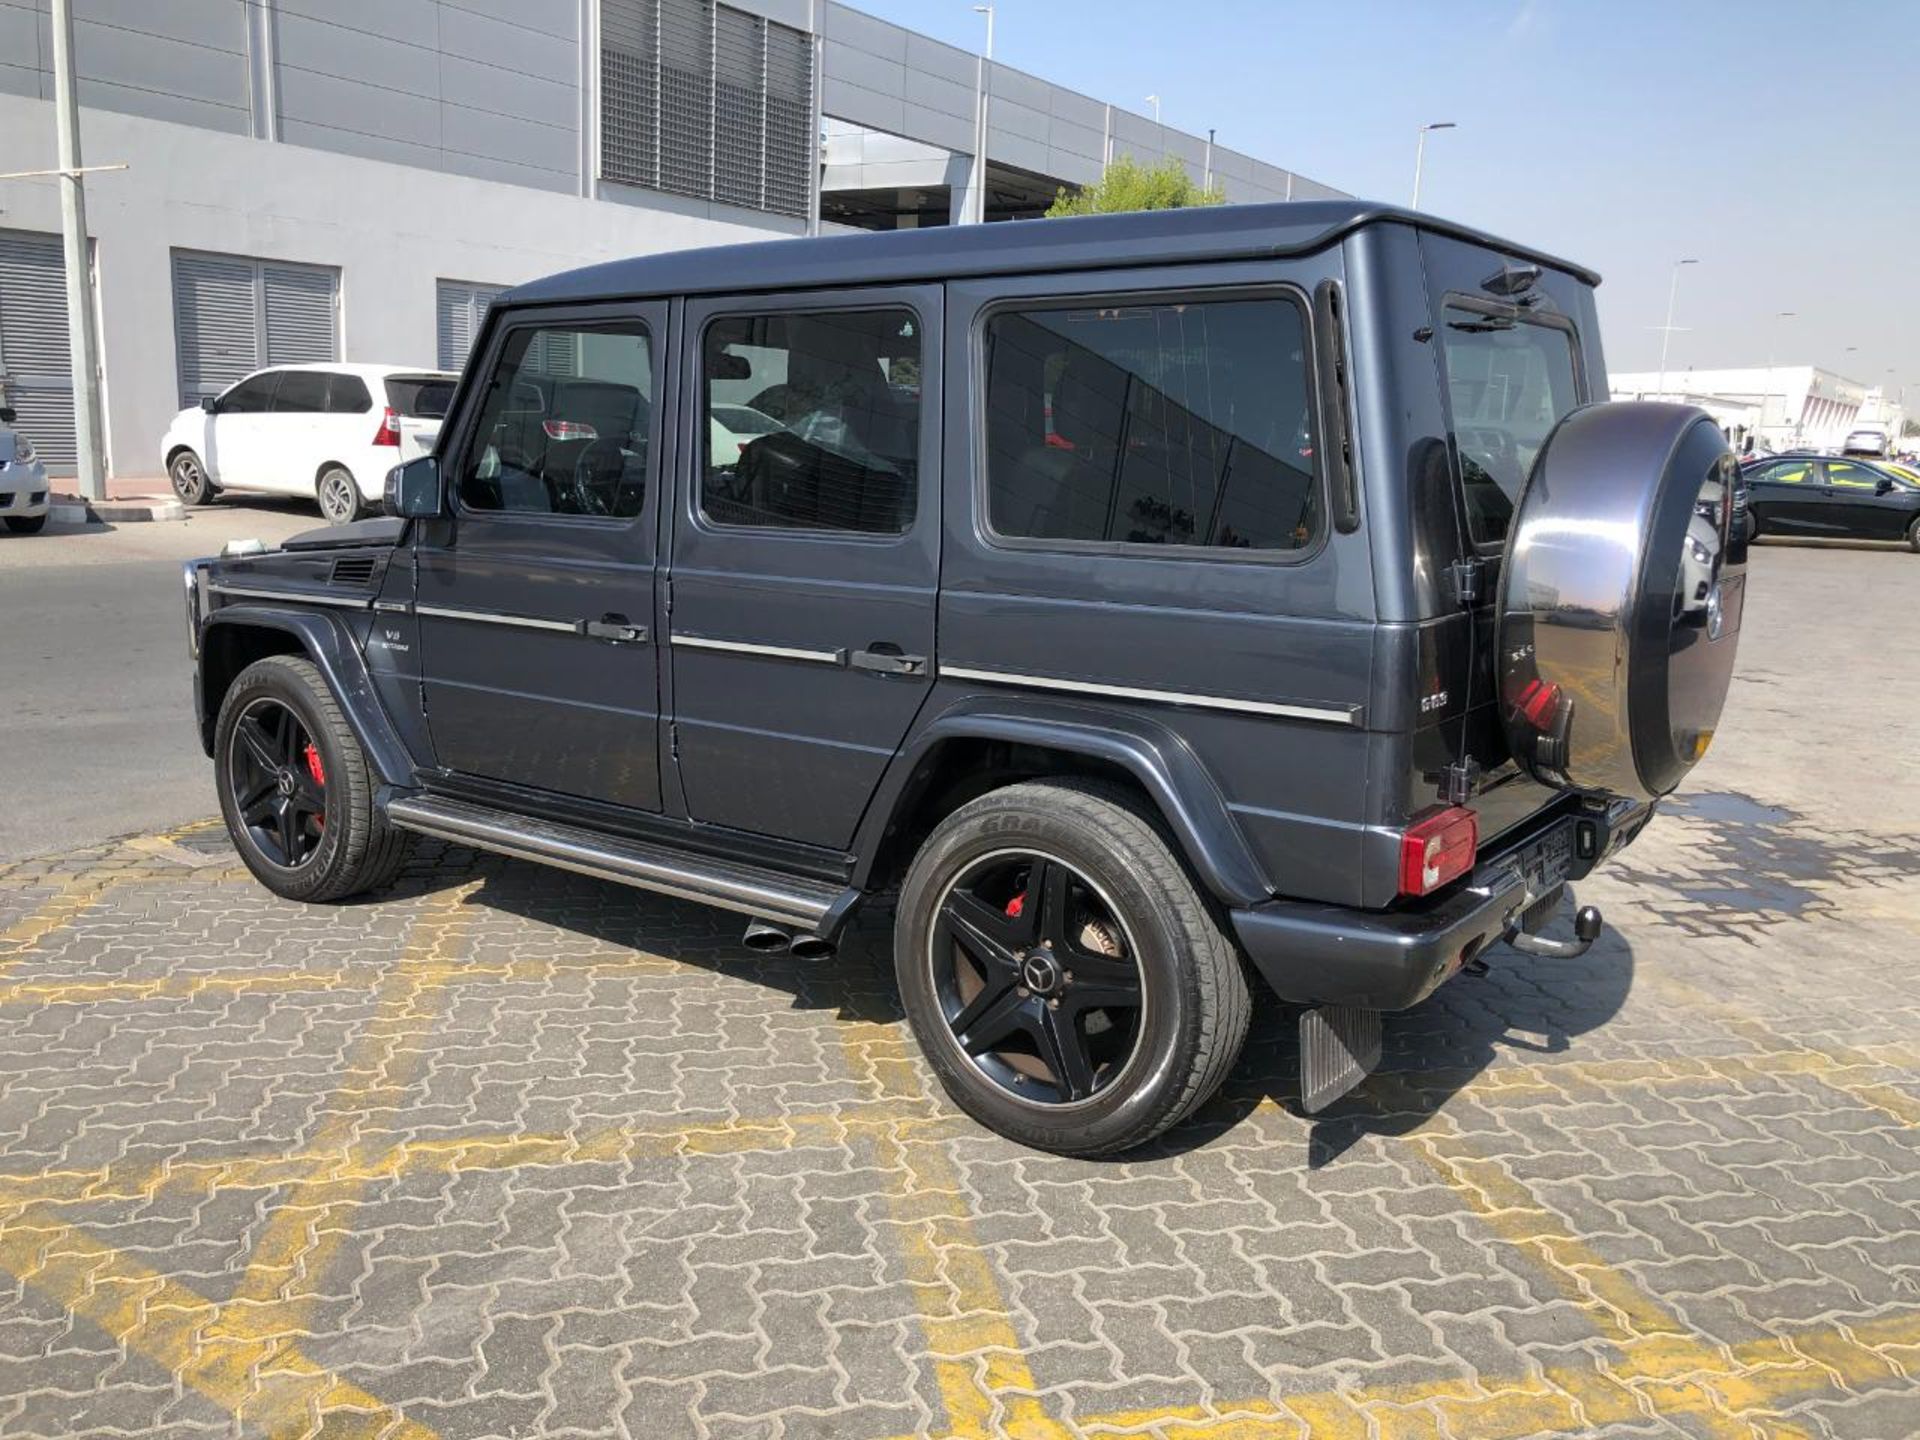 2014 Mercedes G63 65,000 km Service history Dark charcoal grey With 2 tone interior - Image 3 of 6